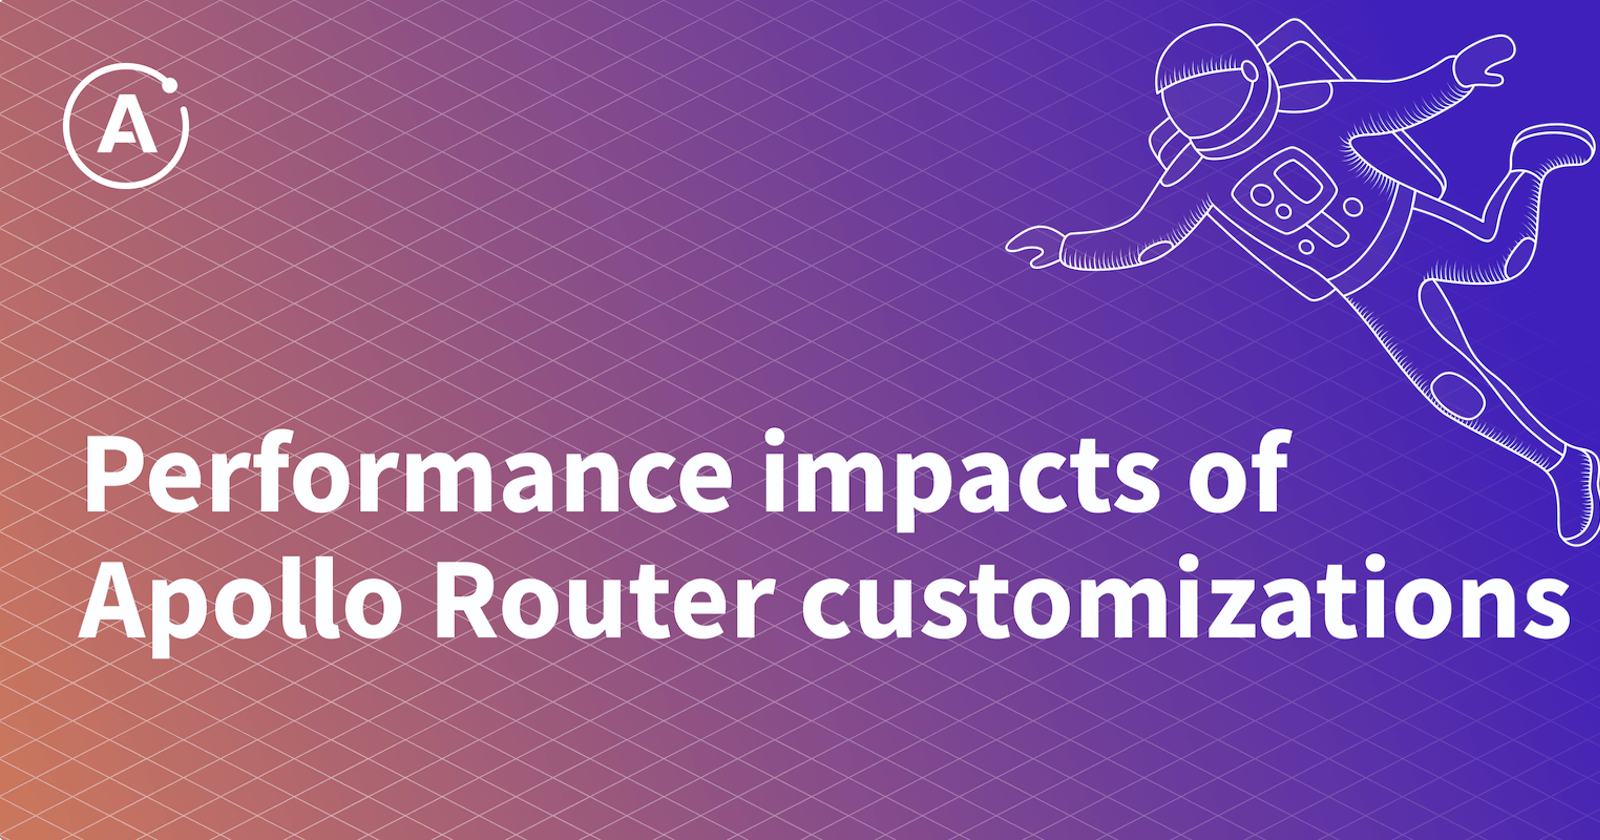 Performance impacts of Apollo Router customizations